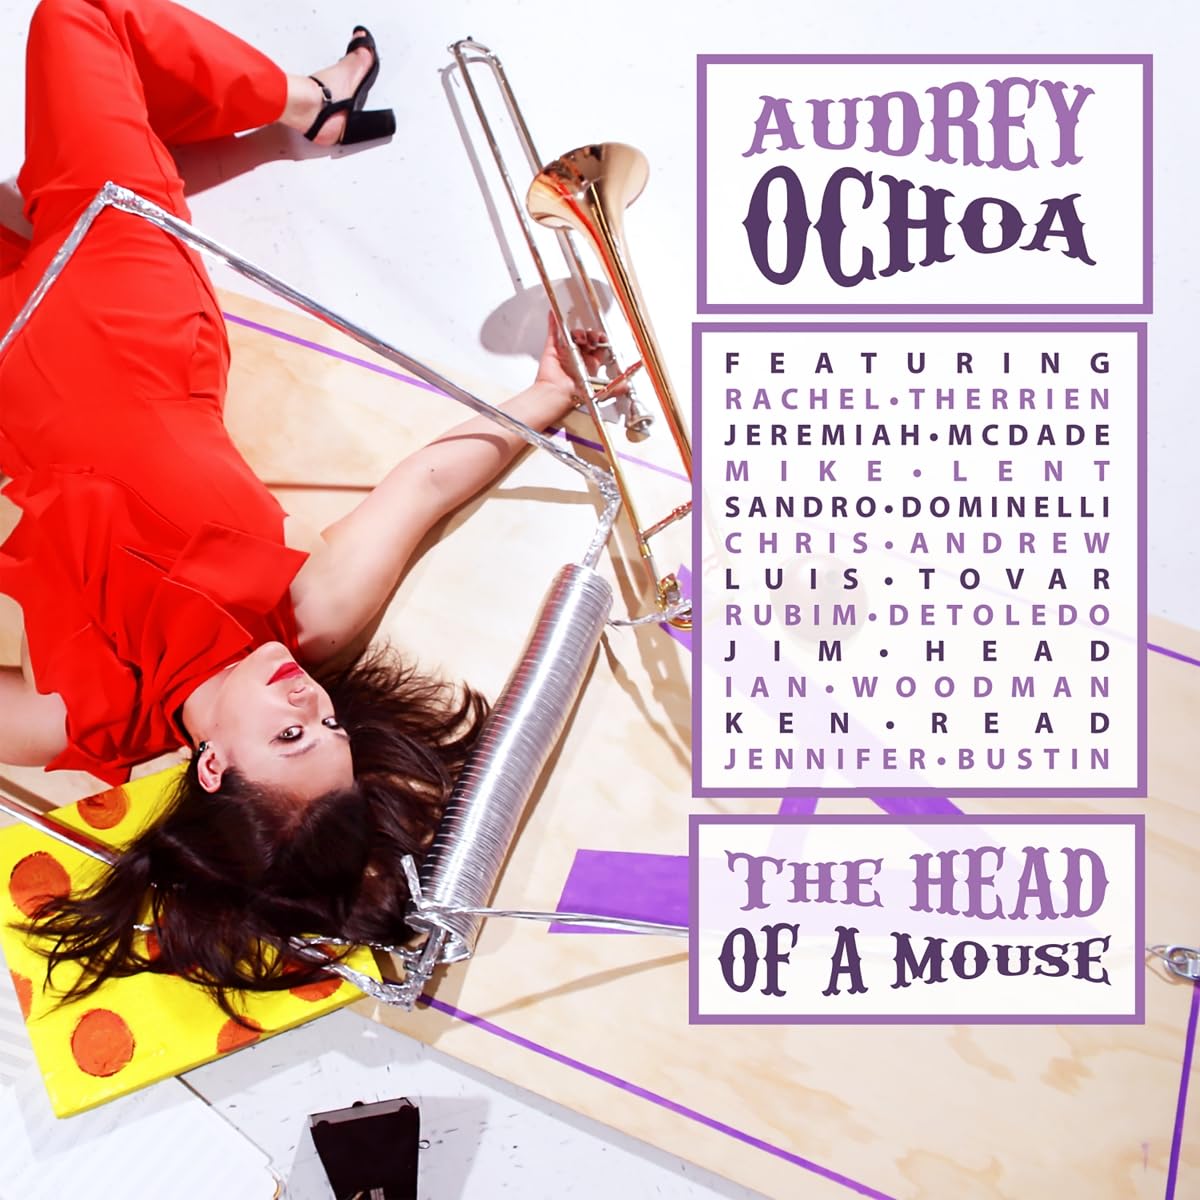 AUDREY OCHOA - The Head Of A Mouse cover 